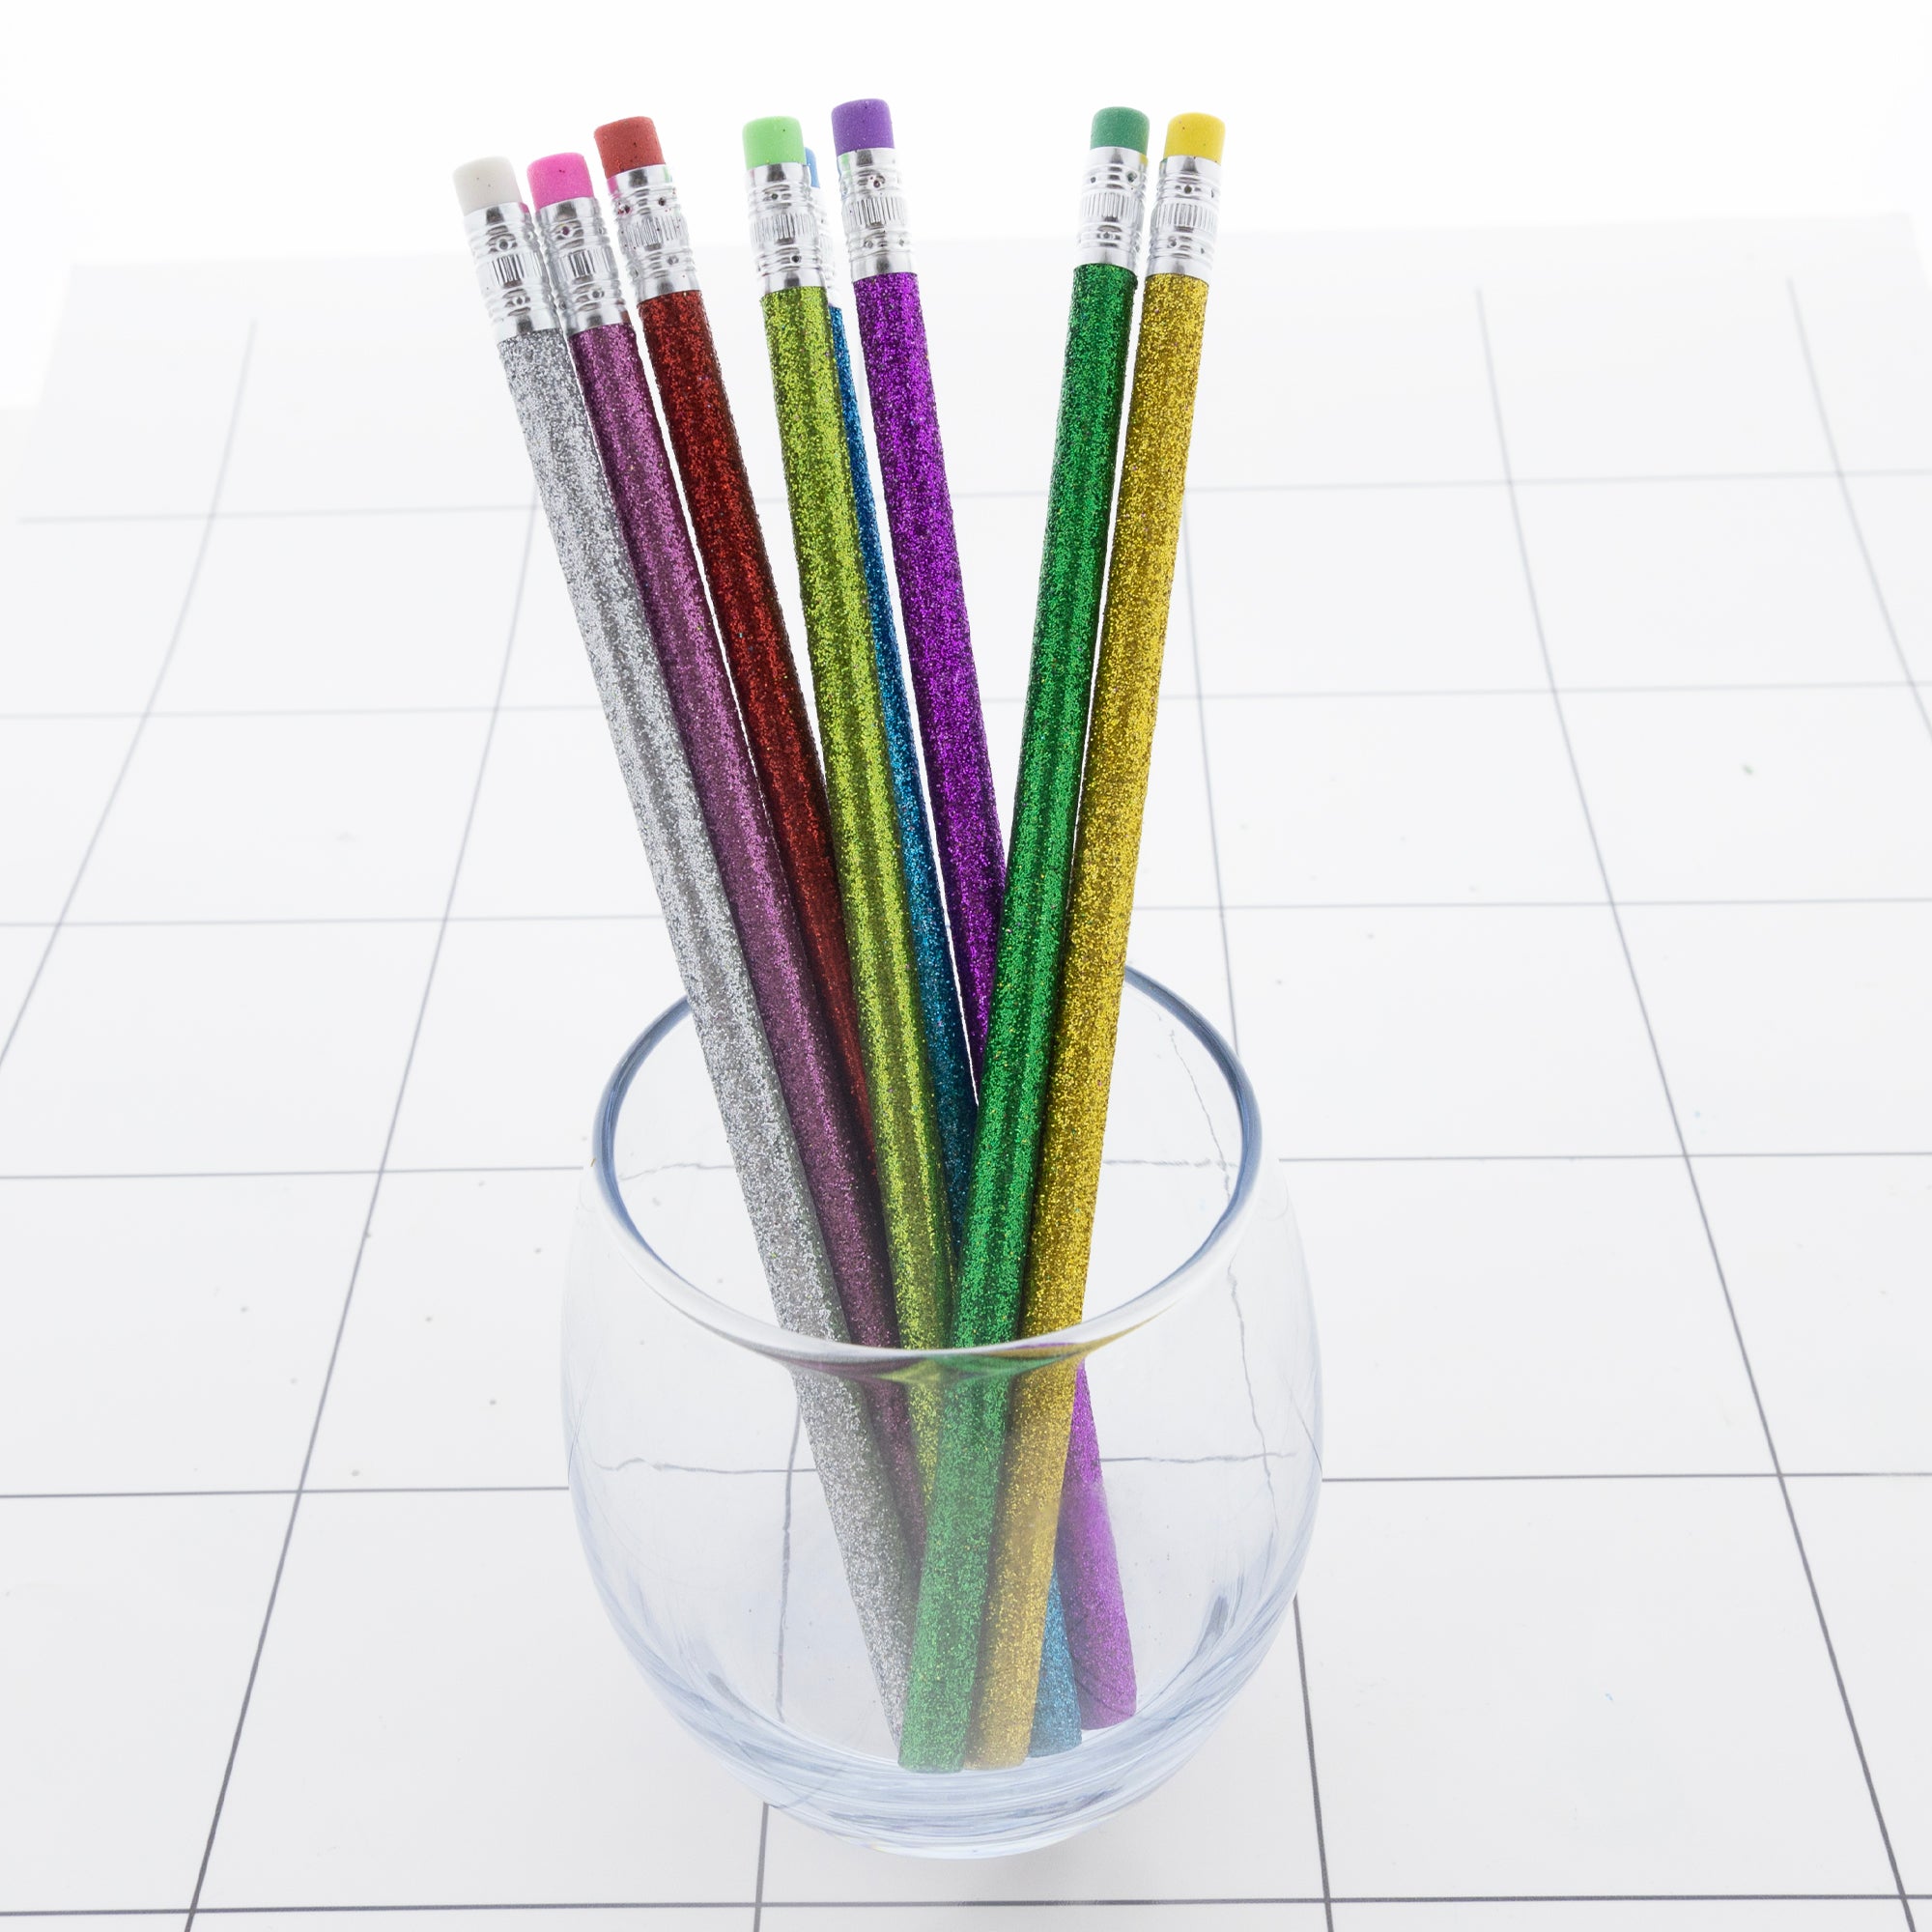 New scented pencils could put students in the mood to learn